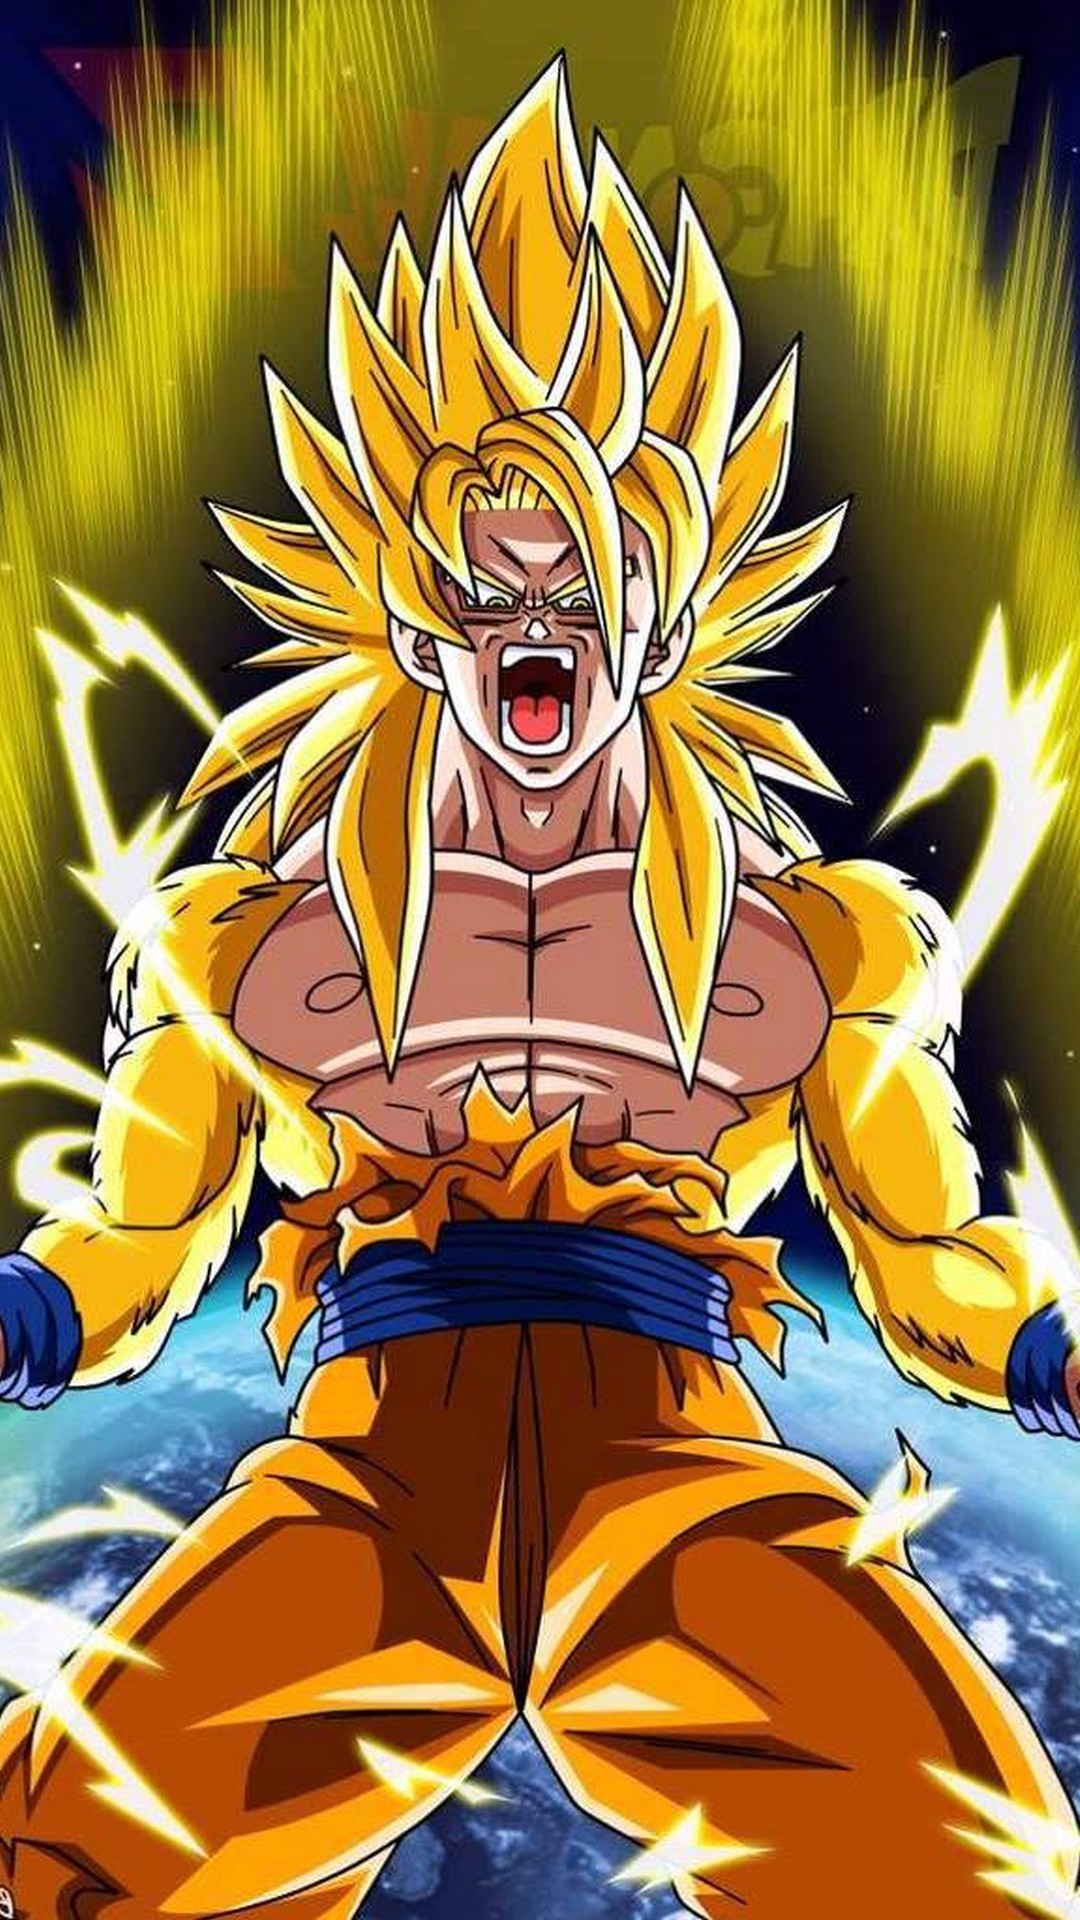 Goku SSJ3 Wallpaper For iPhone with image resolution 1080x1920 pixel. You can make this wallpaper for your iPhone 5, 6, 7, 8, X backgrounds, Mobile Screensaver, or iPad Lock Screen